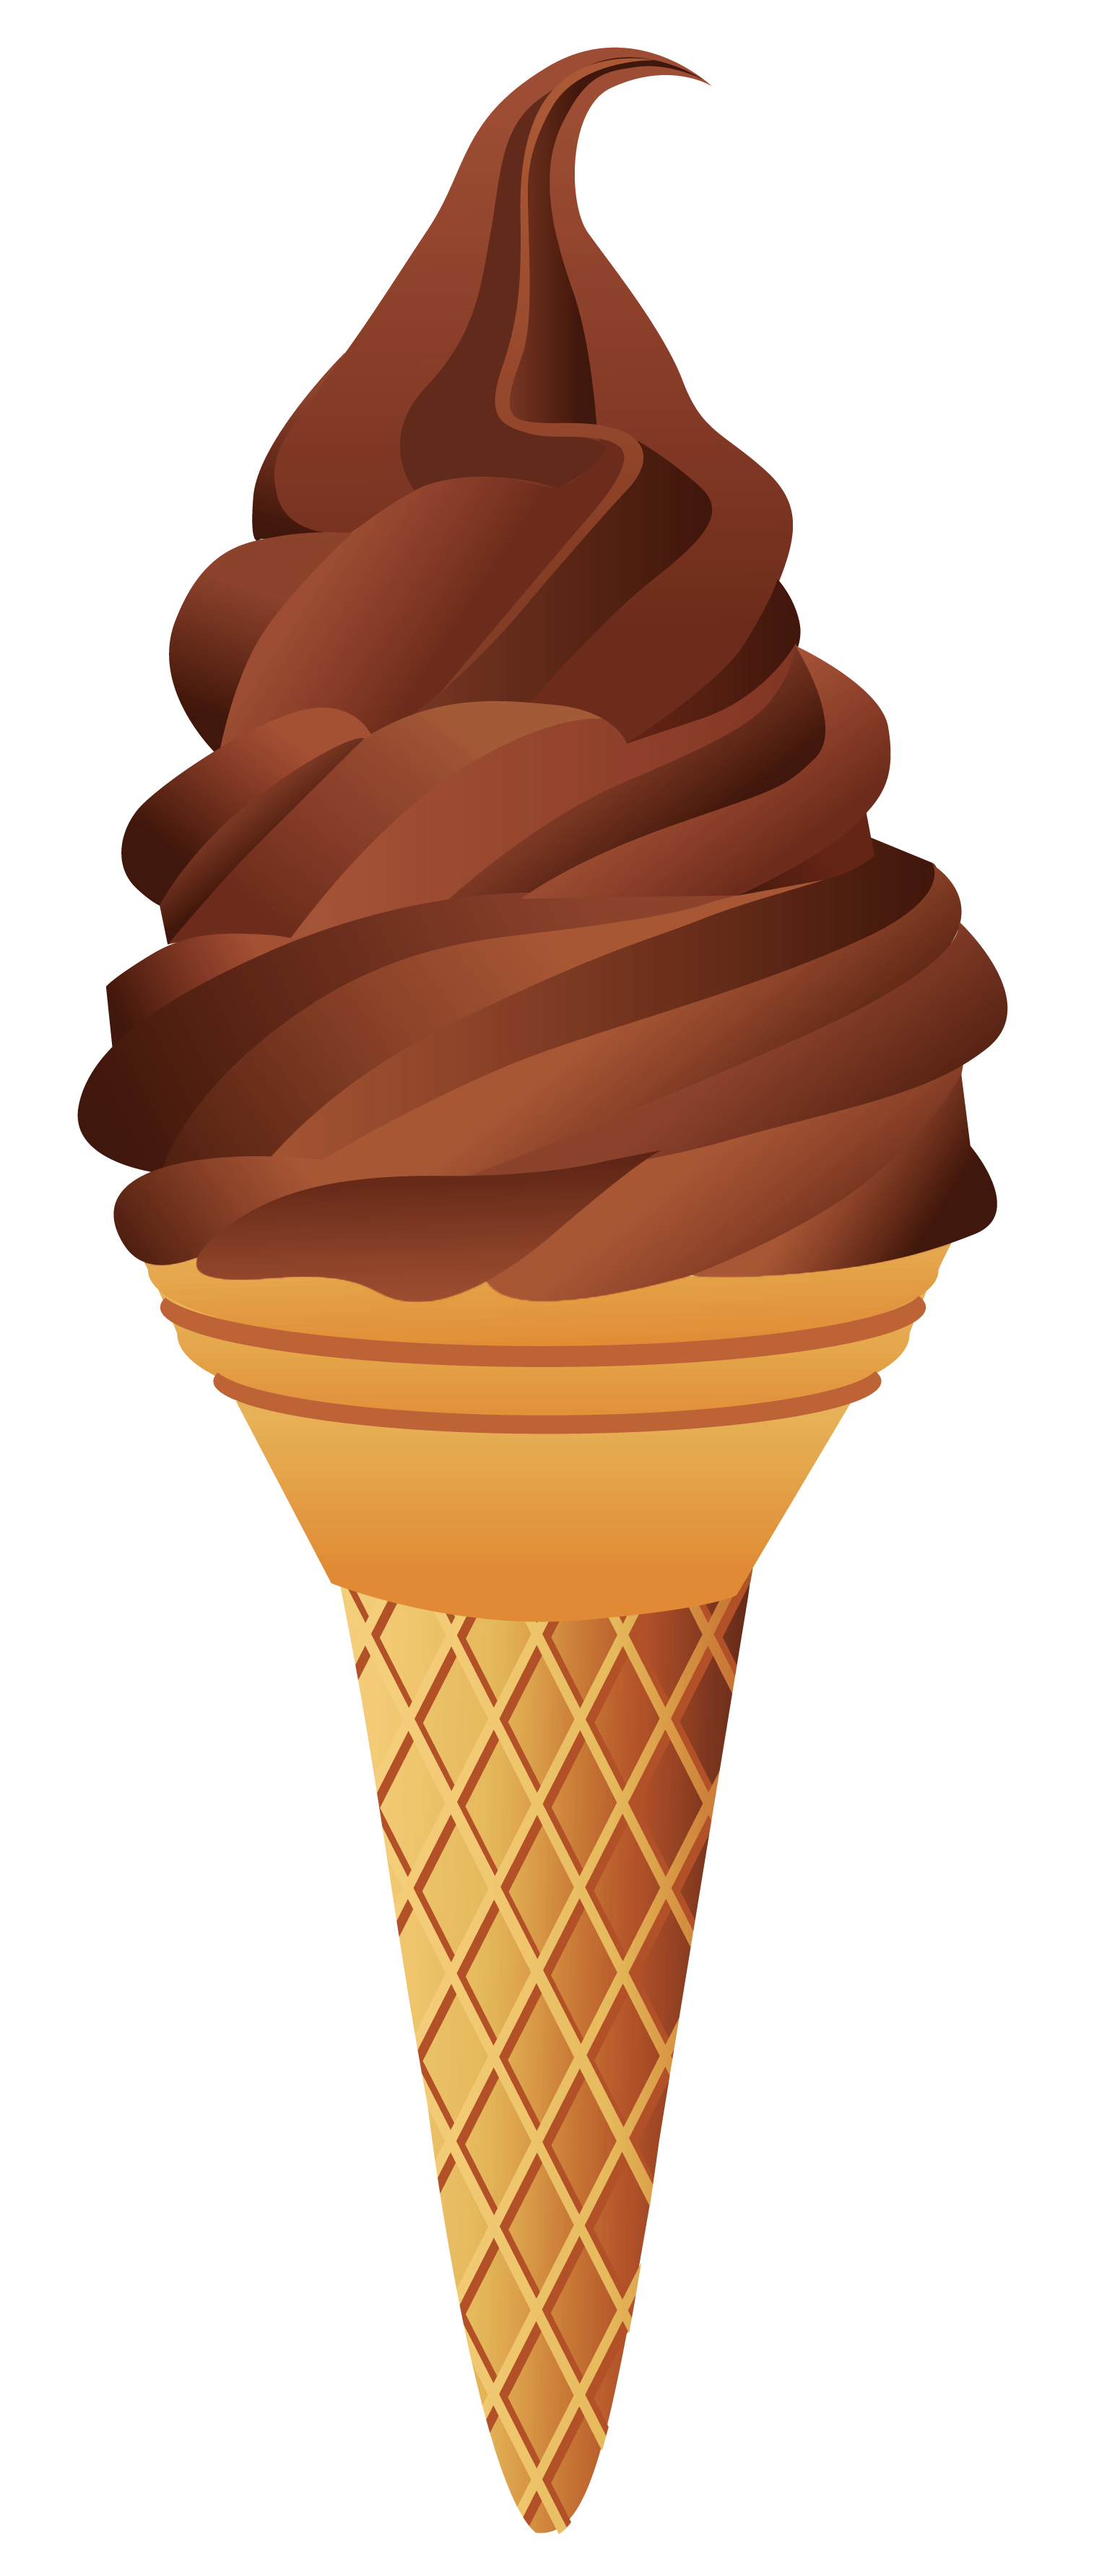 Delicious ice cream cone with chocolate toppings png download